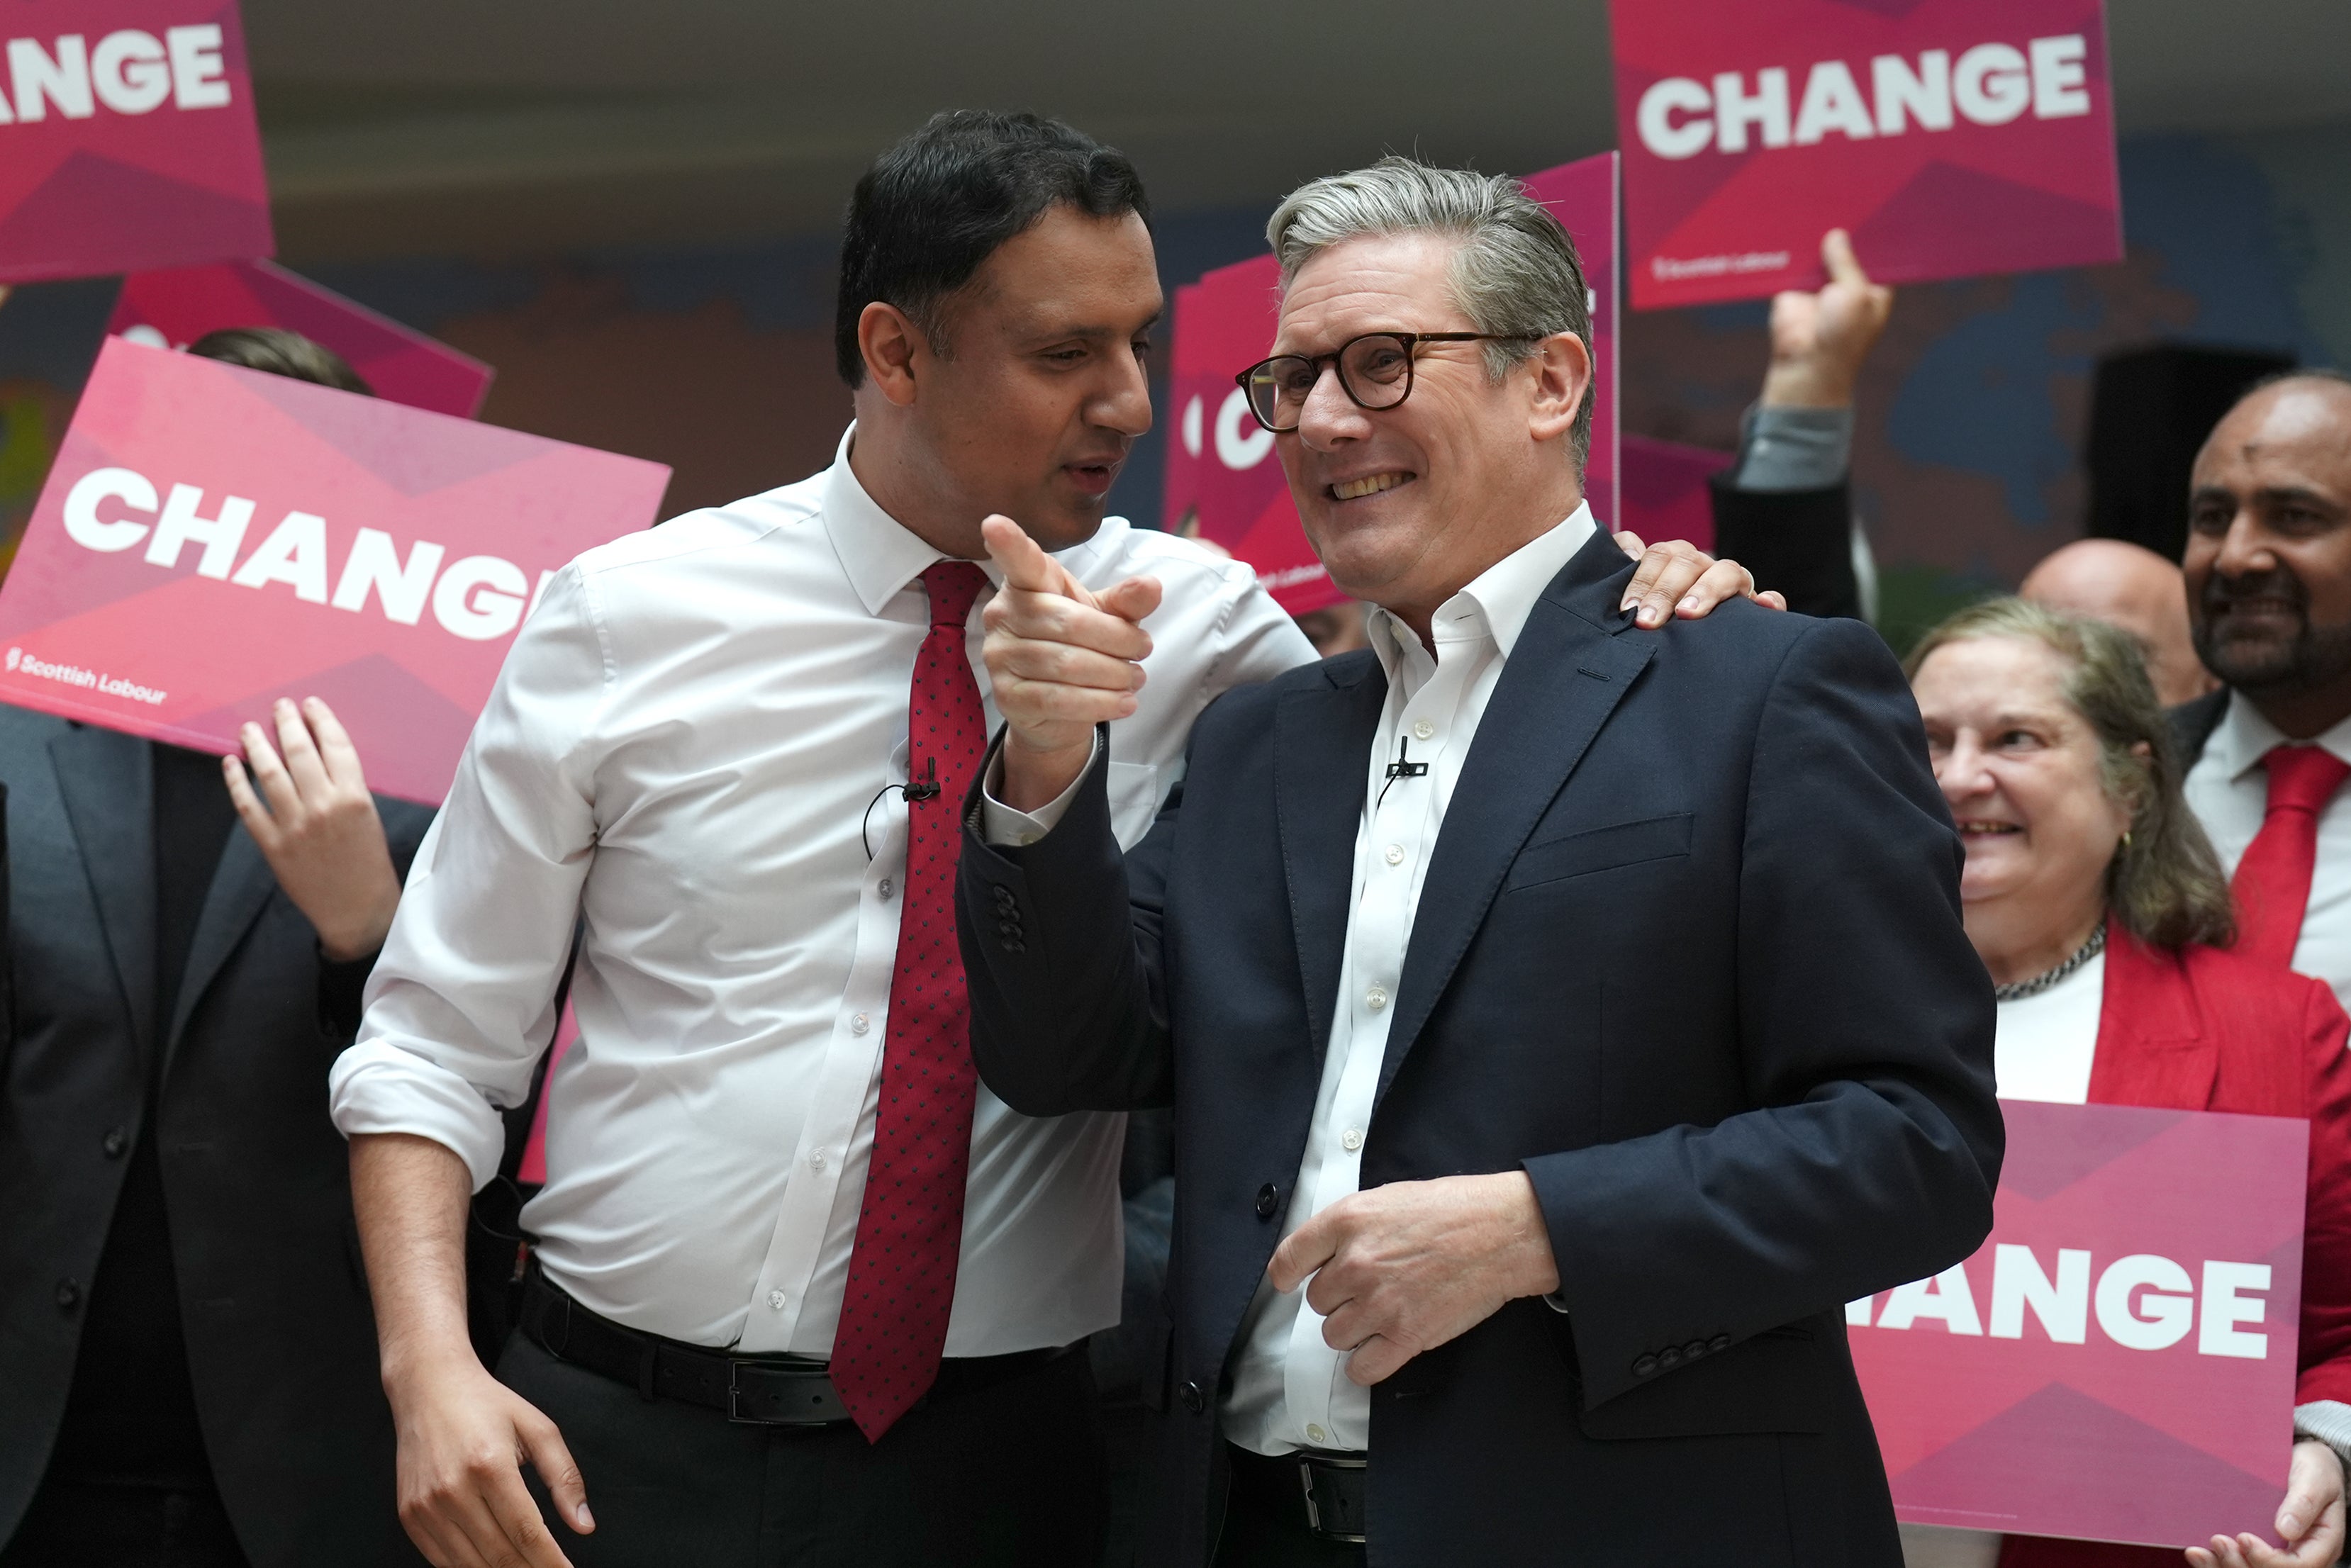 Labour leader Sir Keir Starmer (right) and Scottish Labour leader Anas Sarwar launch Scottish Labour's General Election campaign at City Facilities in Glasgow